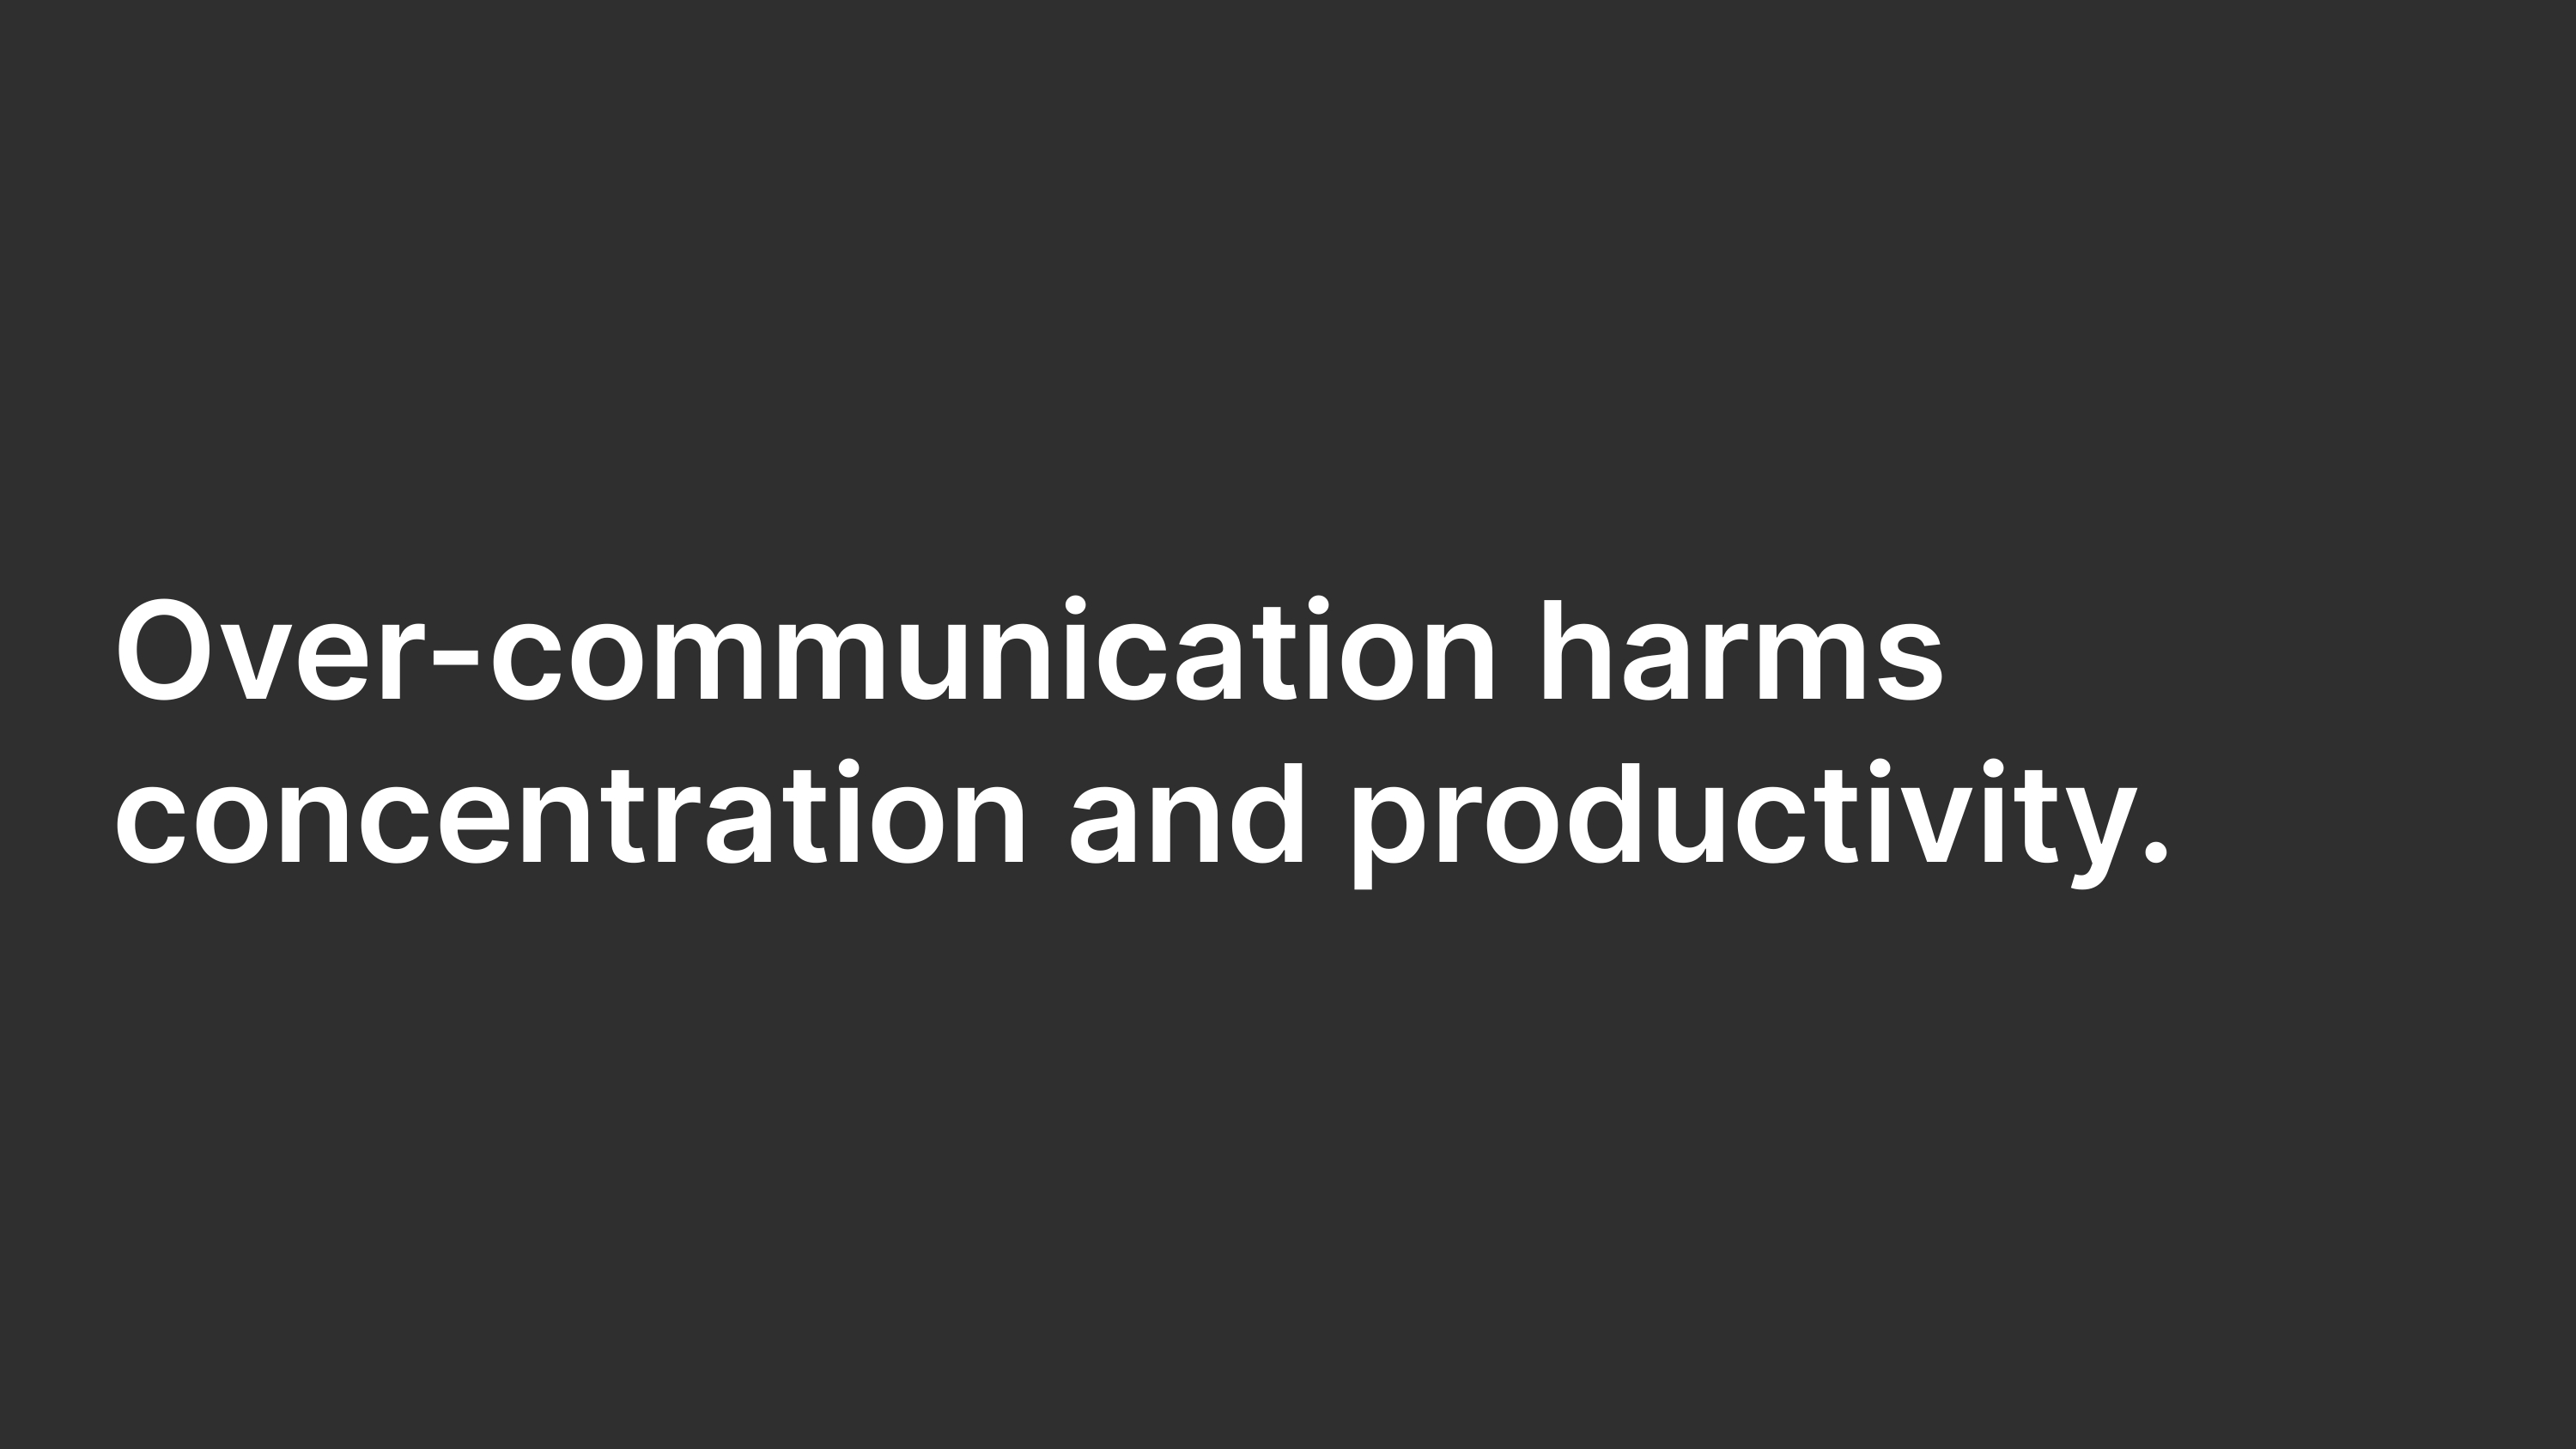 Over-communication harms concentration and productivity.